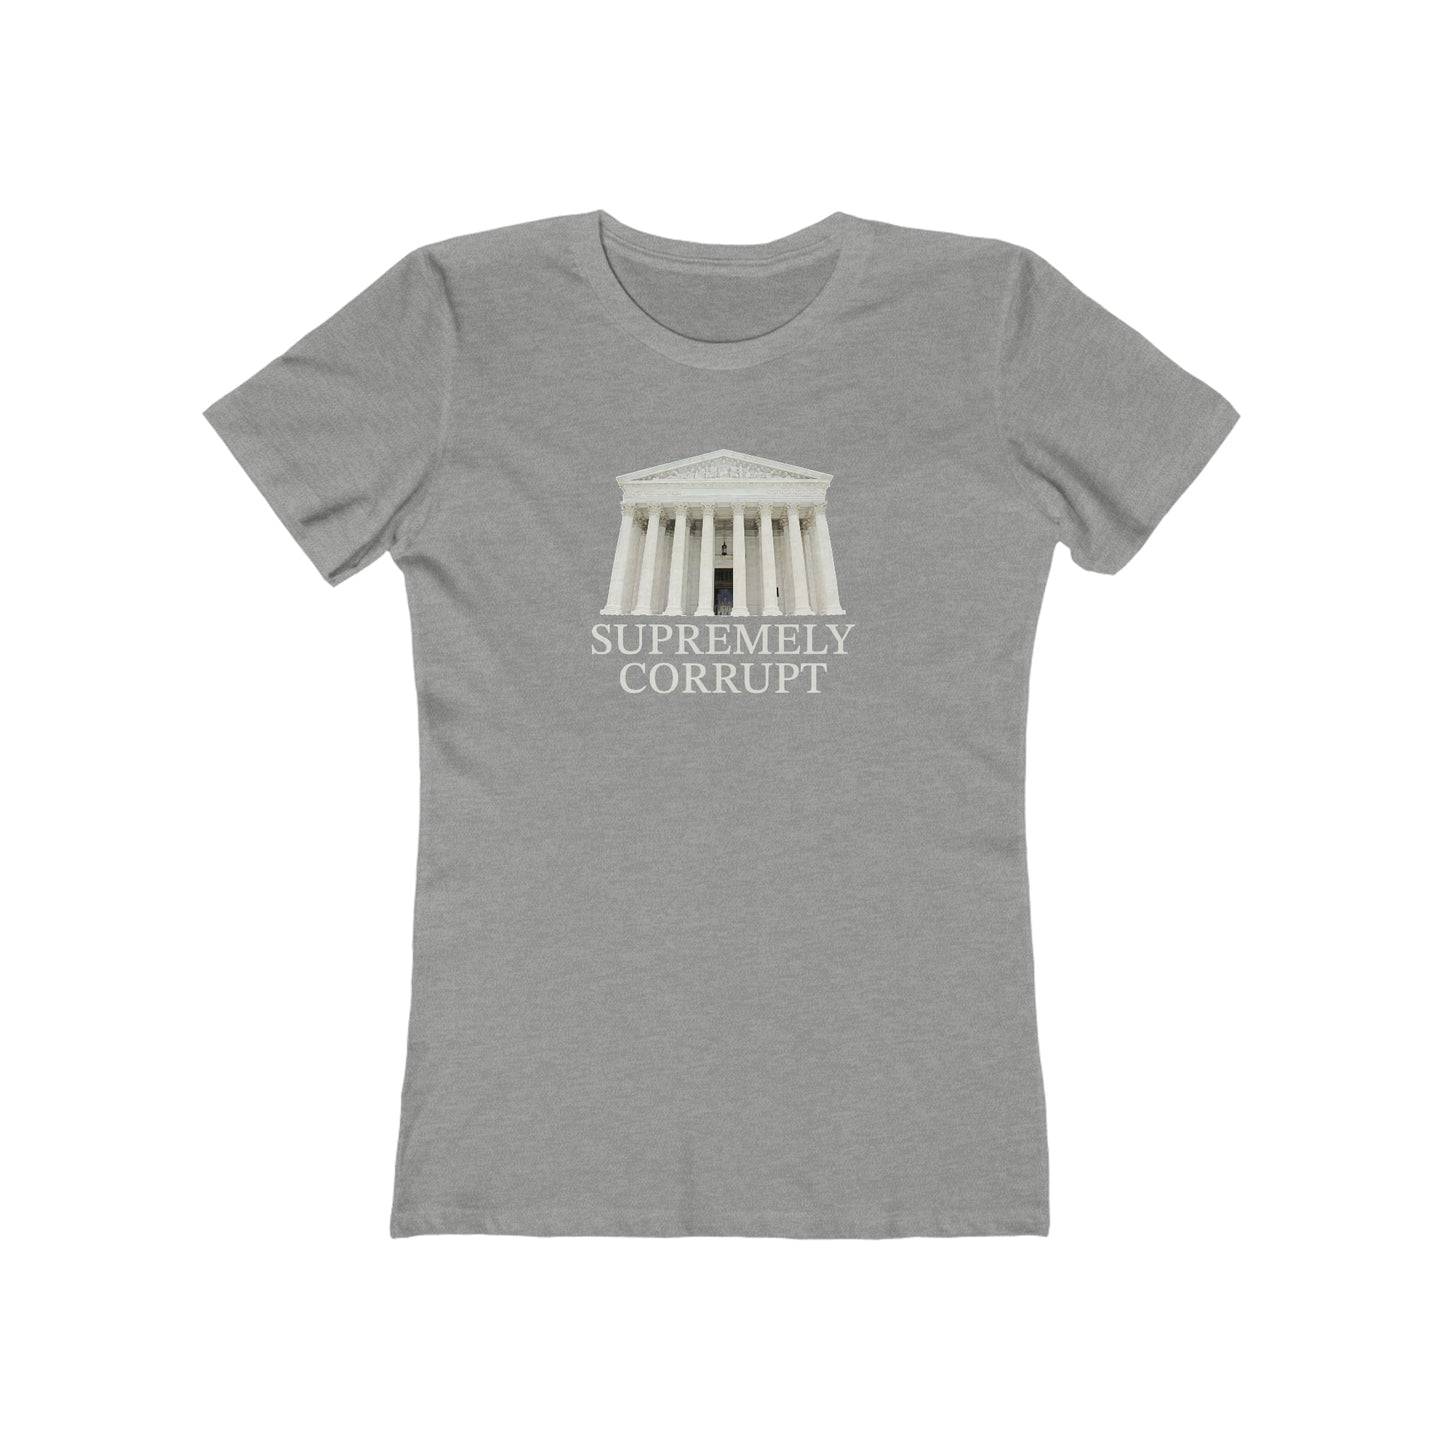 Supremely Corrupt - Women's T-Shirt